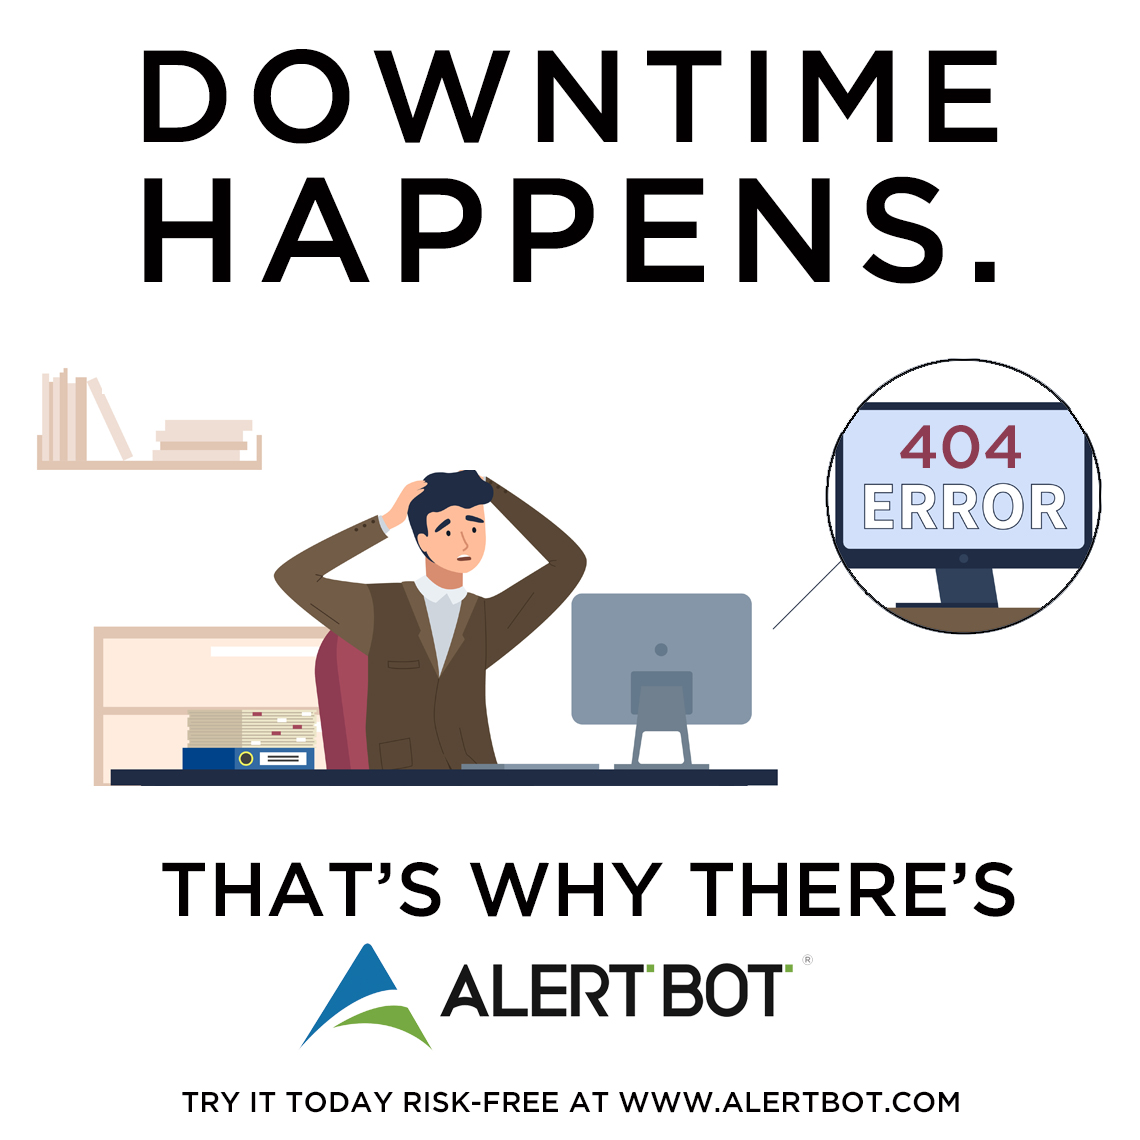 Downtime happens. That's why there's AlertBot.

Fight back against website downtime and try out AlertBot FREE today! AlertBot.com

#webperf #downtimehappens #downtime #websitemonitoring #webperformance